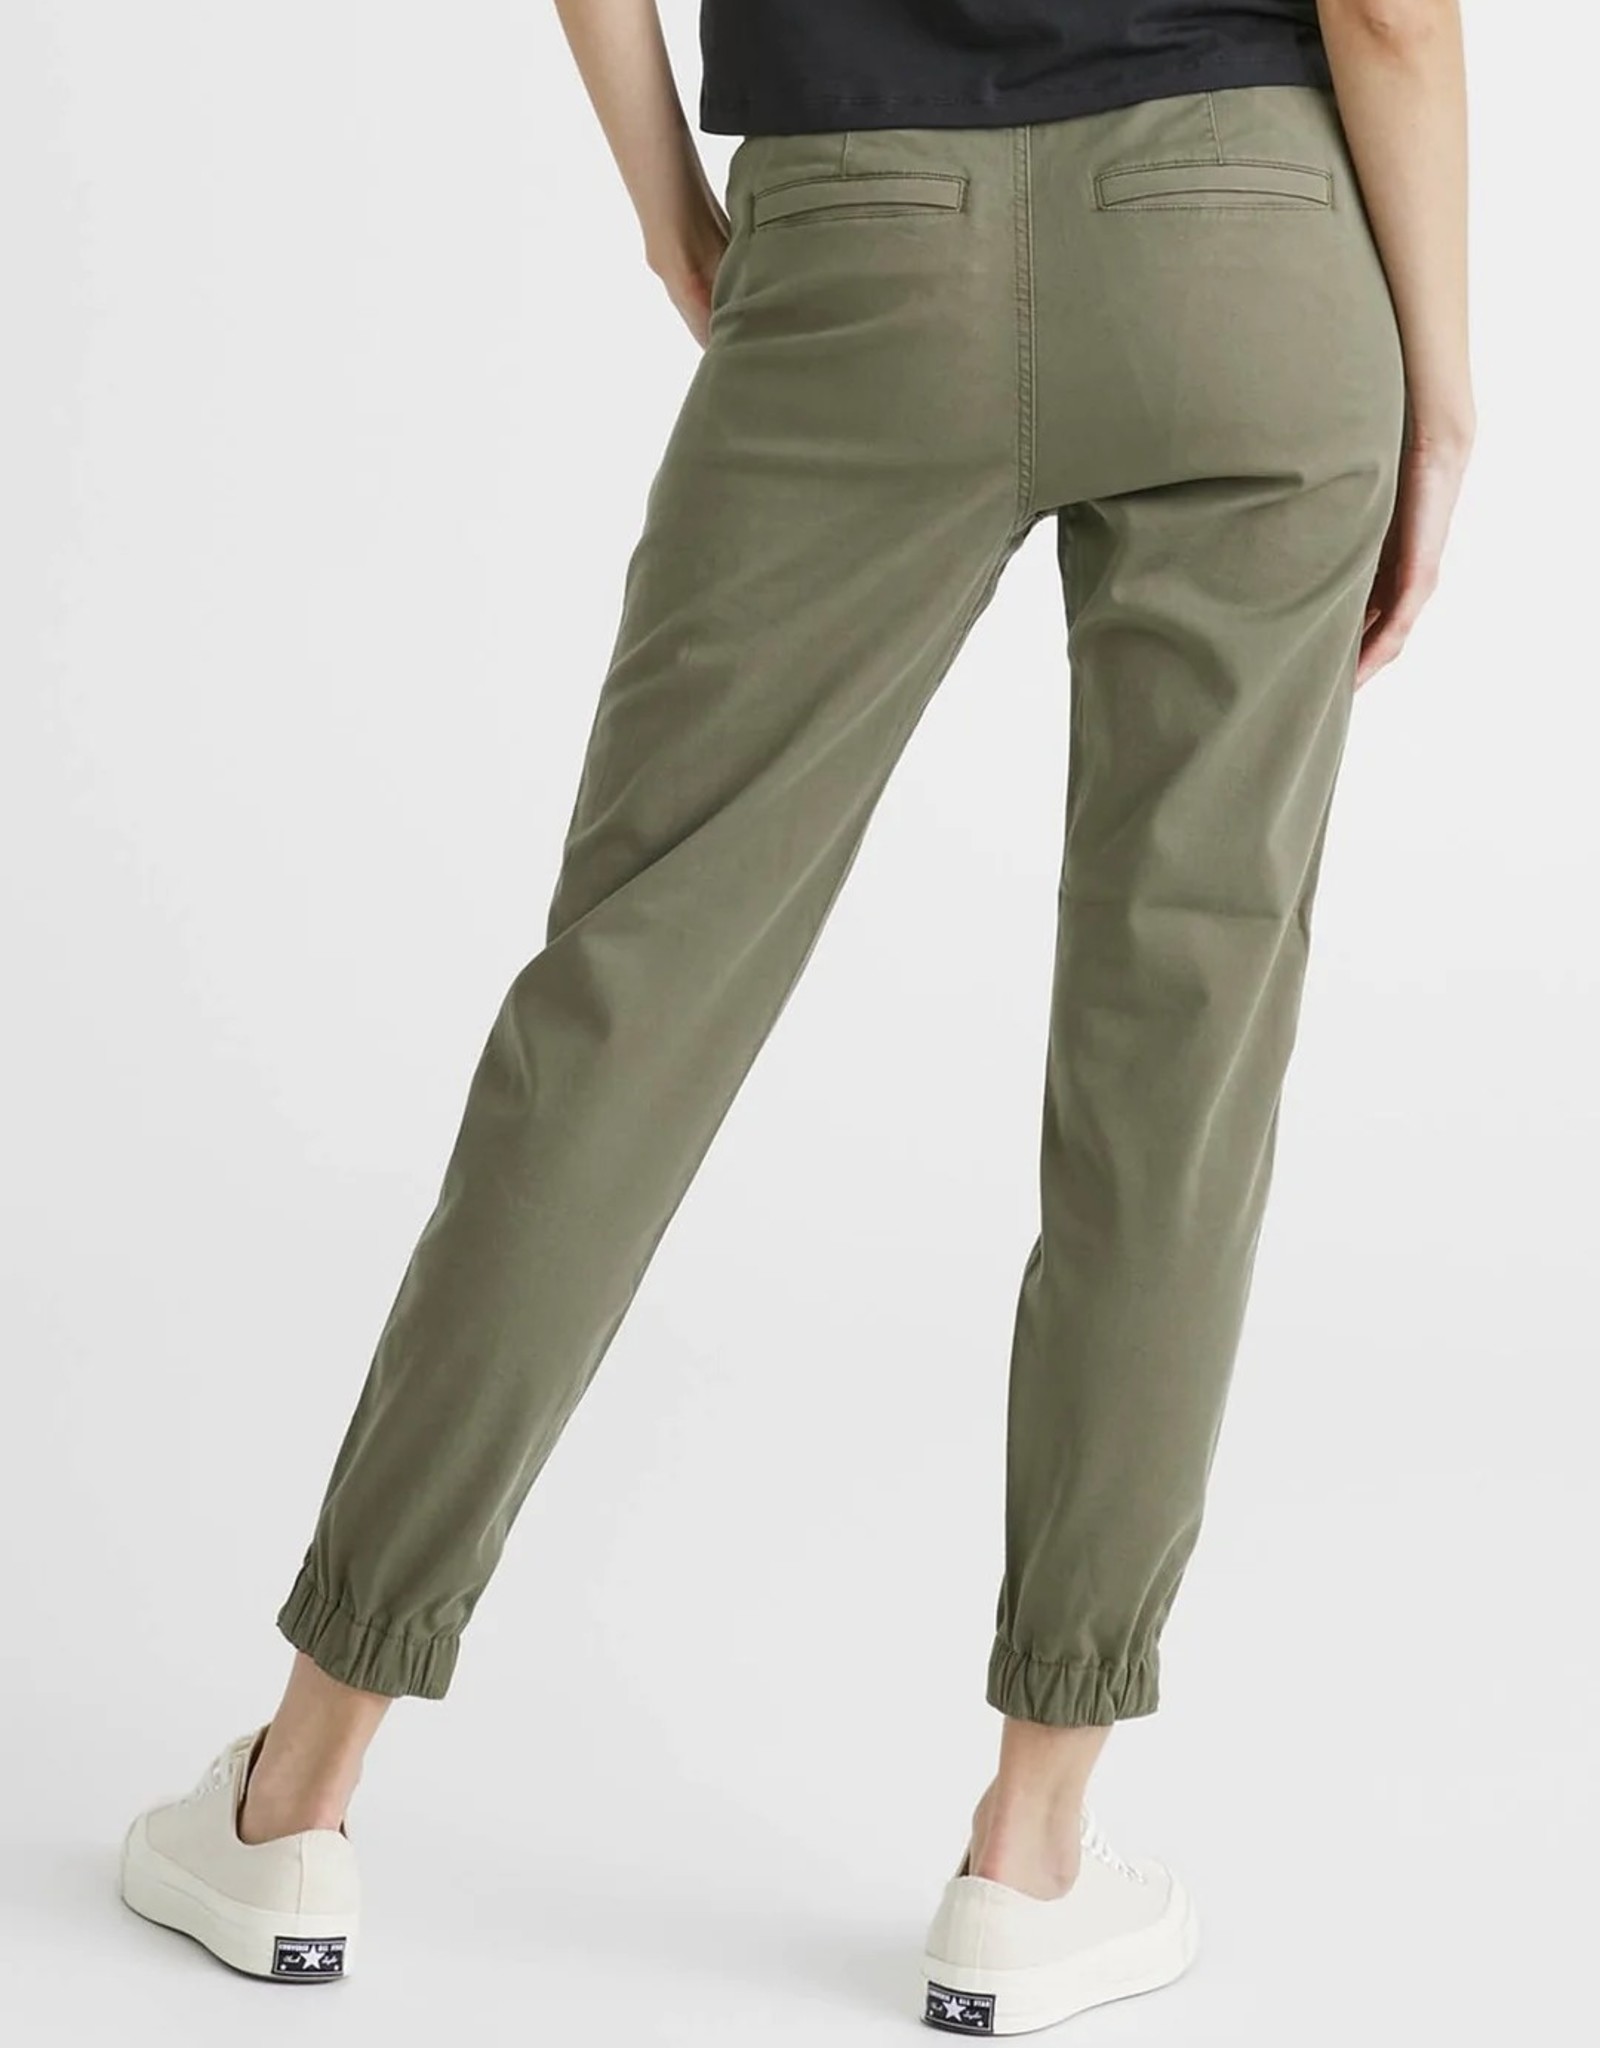 Duer Live Free Adventure Pant - Fatigues